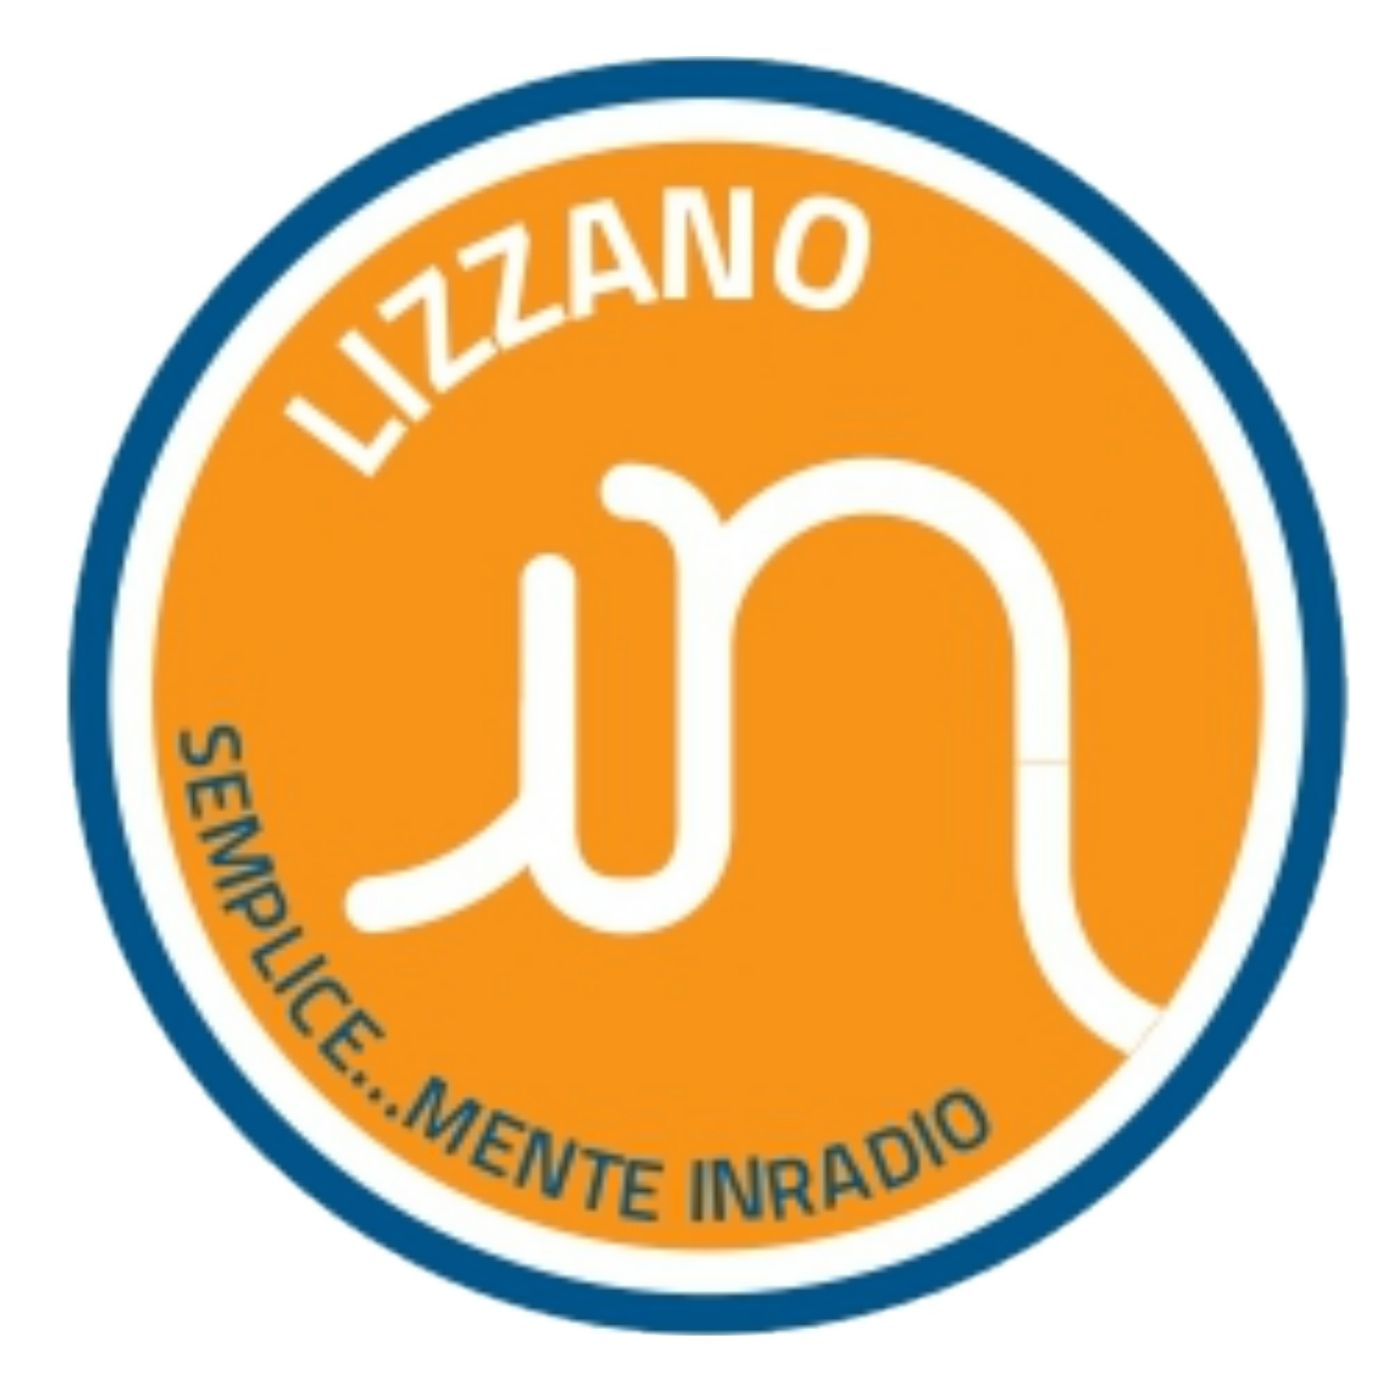 Ang In Radio Serendipity - Giovani In Musica